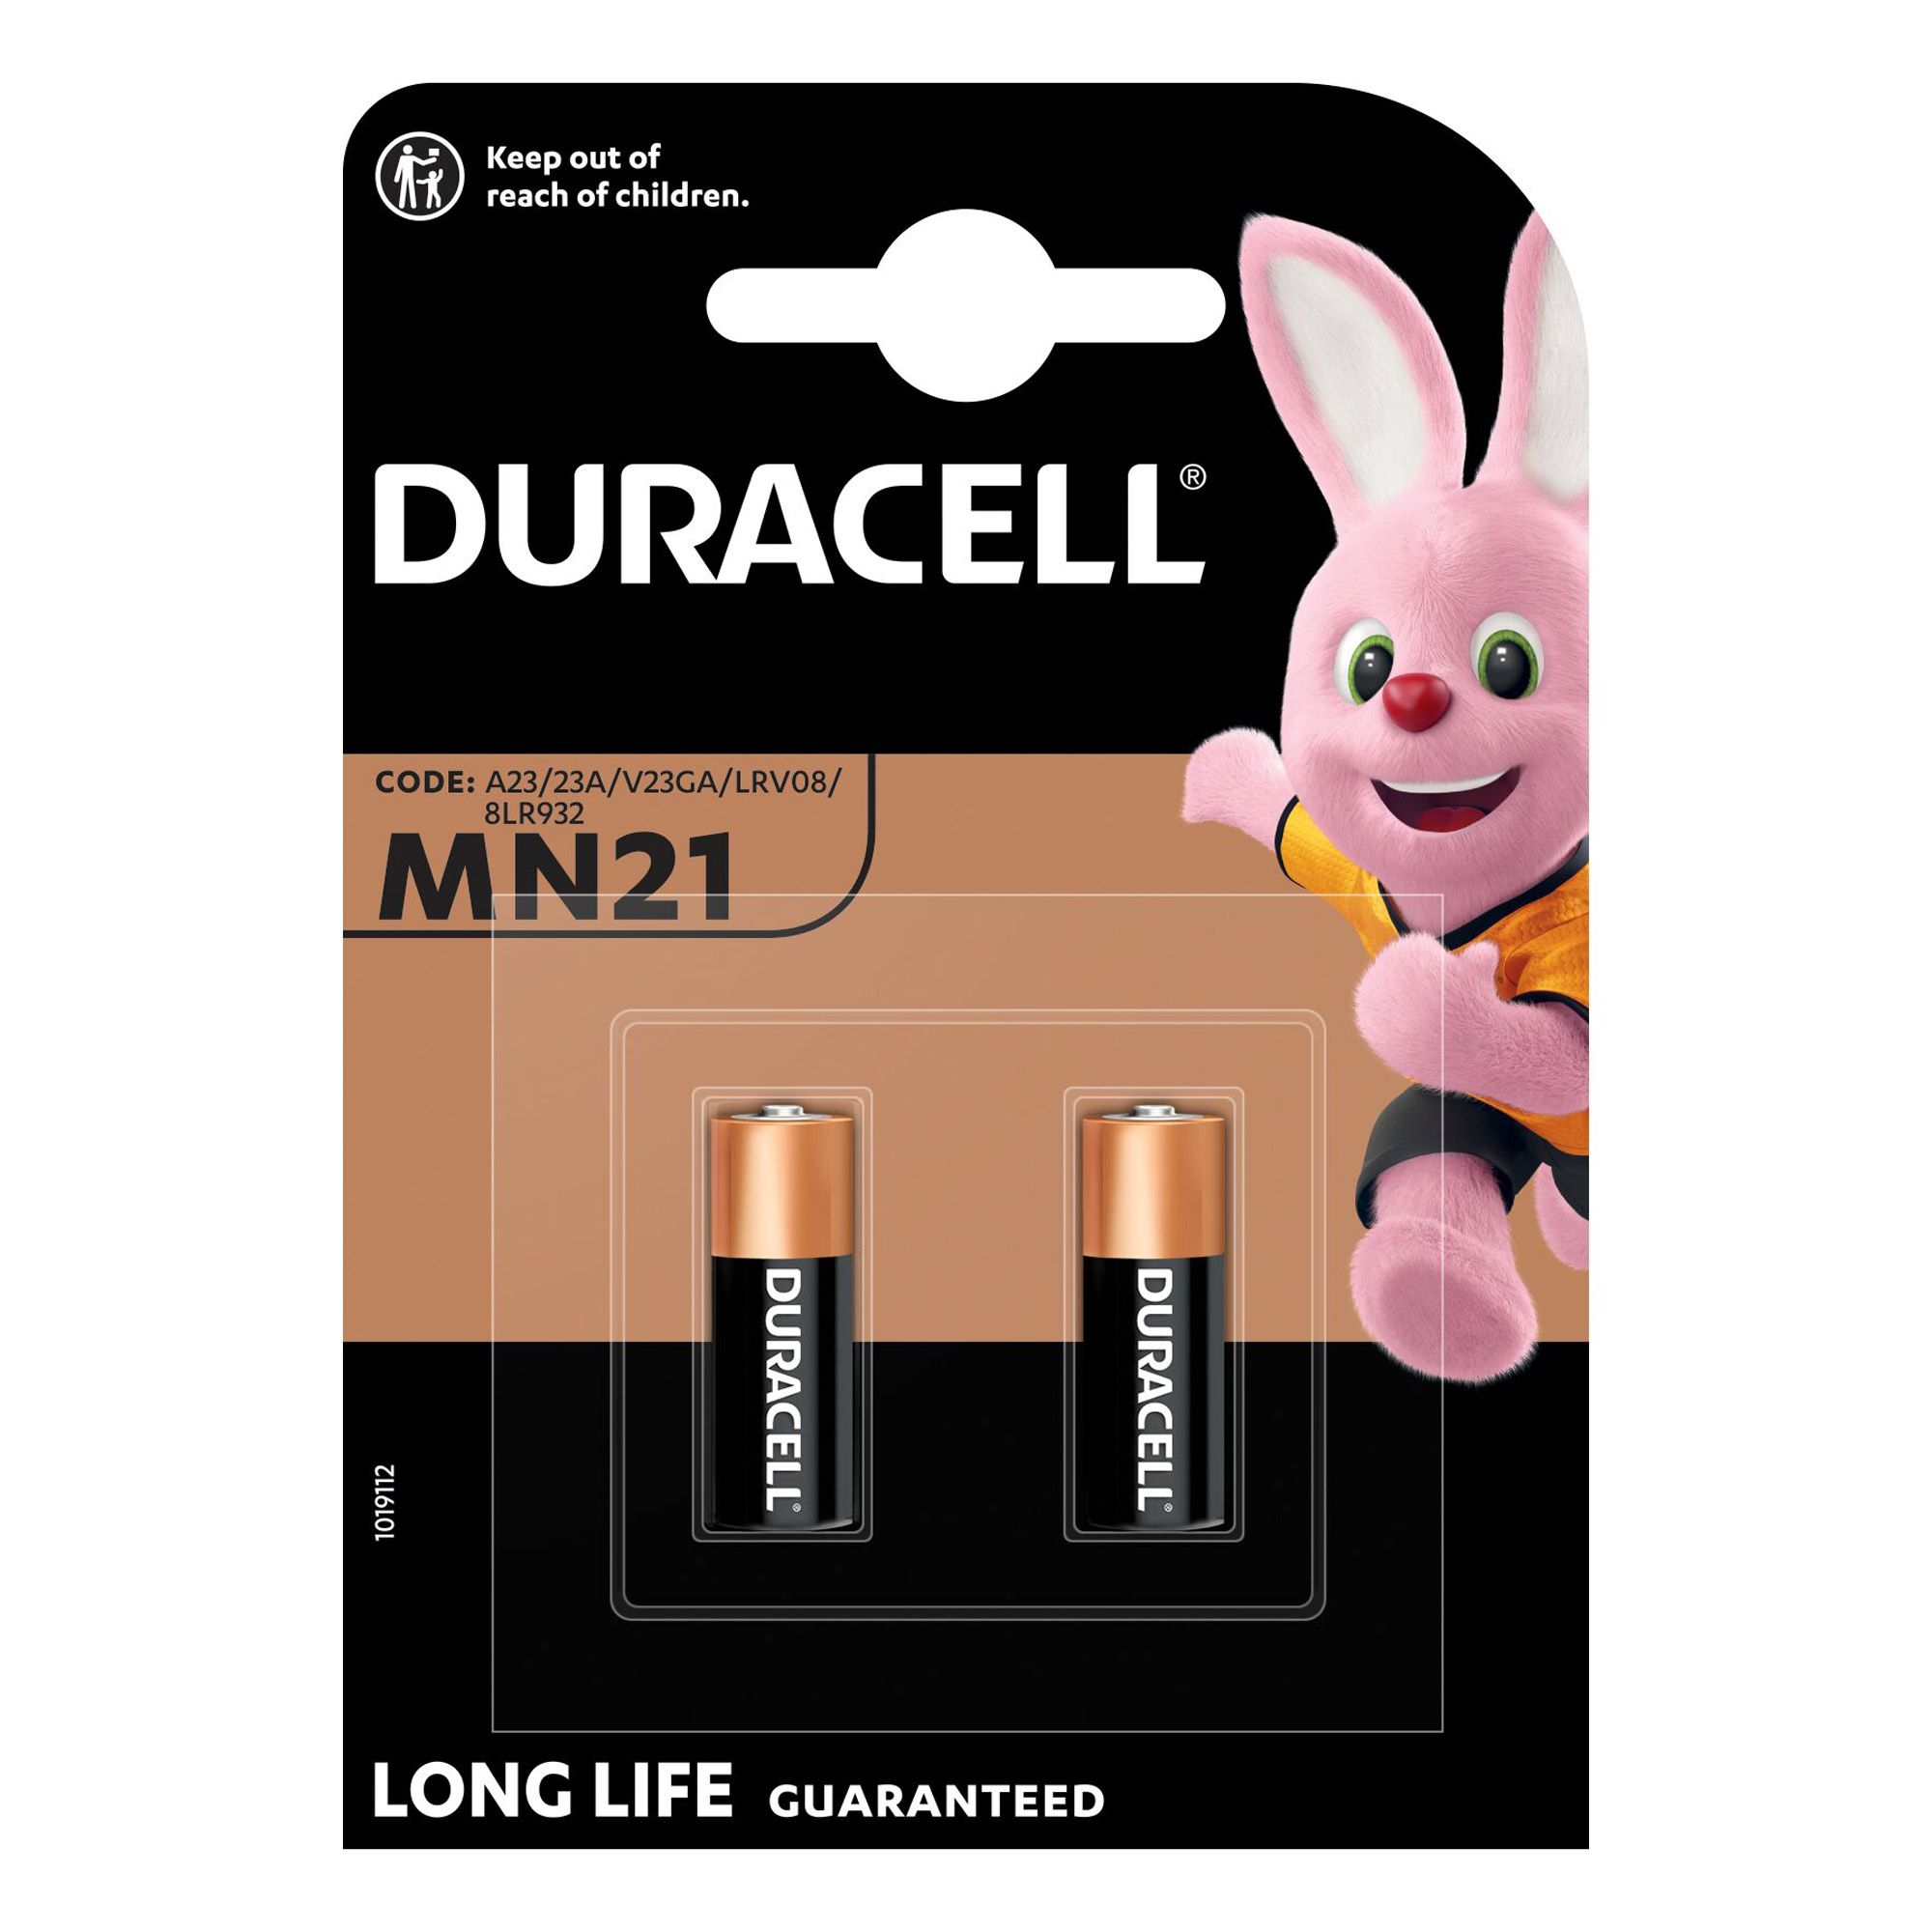 Duracell MN21- LRV08 Duracell Security Twin Pack Bulb